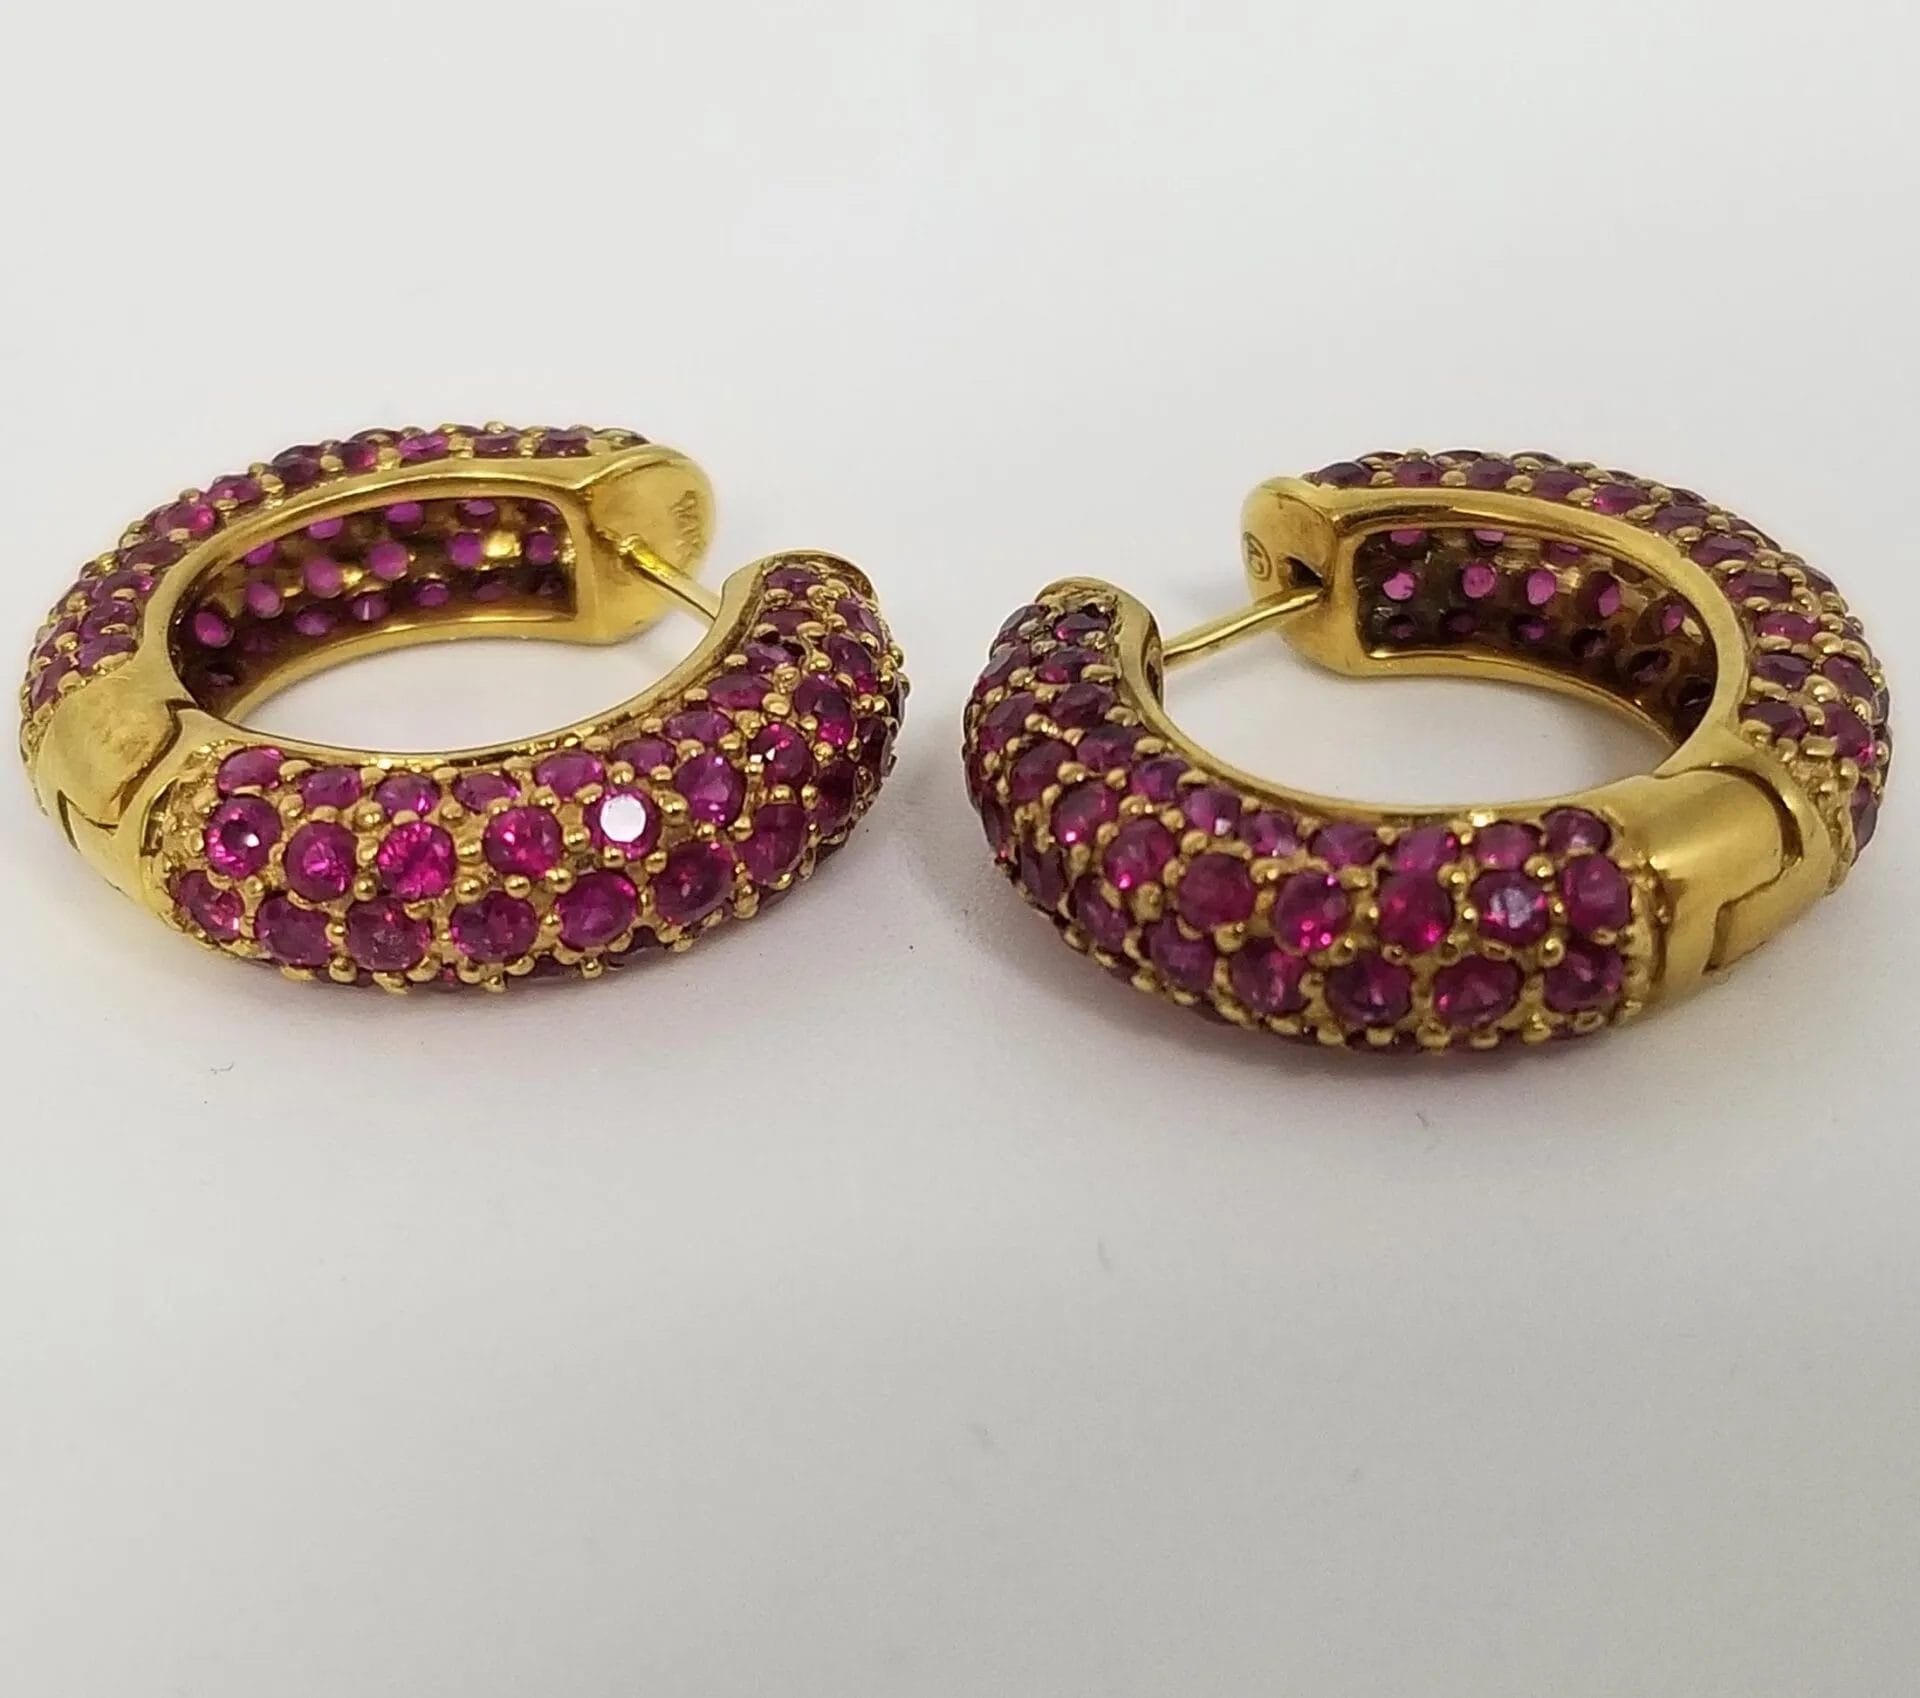 A pair of gold hoop earrings with pink stones.